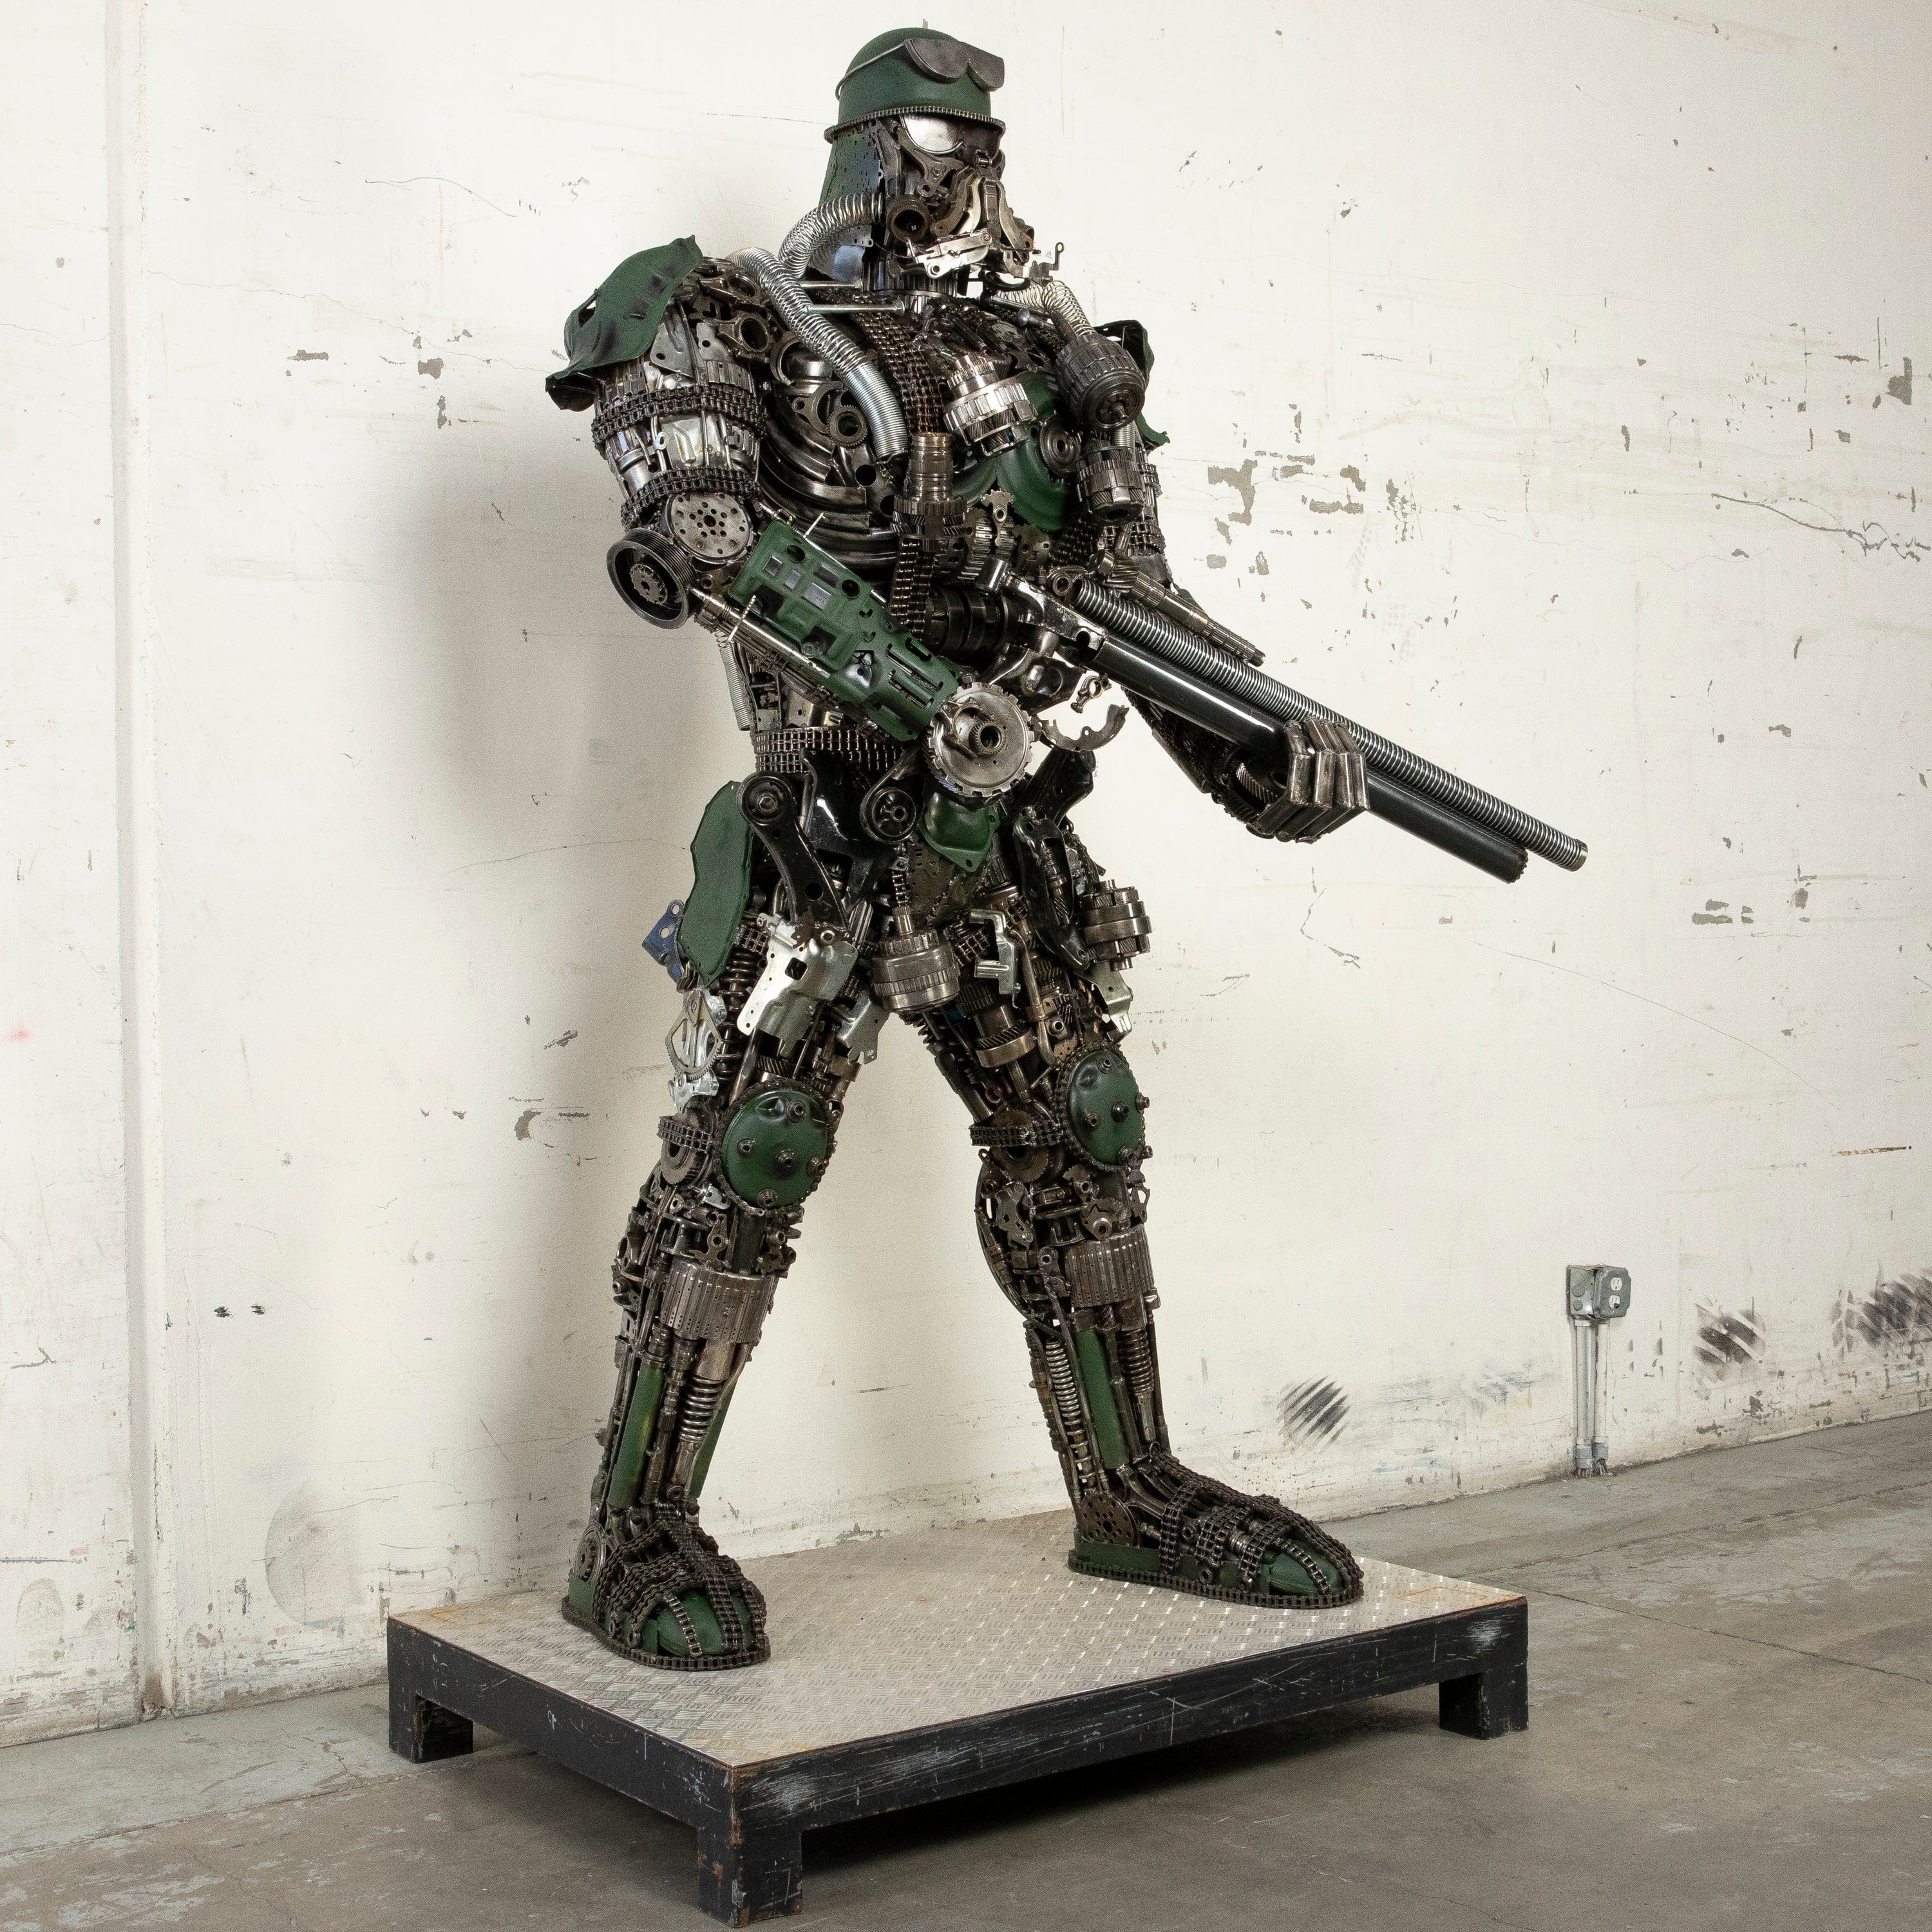 Kalifano Recycled Metal Art 91" Army Storm Trooper Inspired Recycled Metal Art Sculpture RMS-ST230-S08